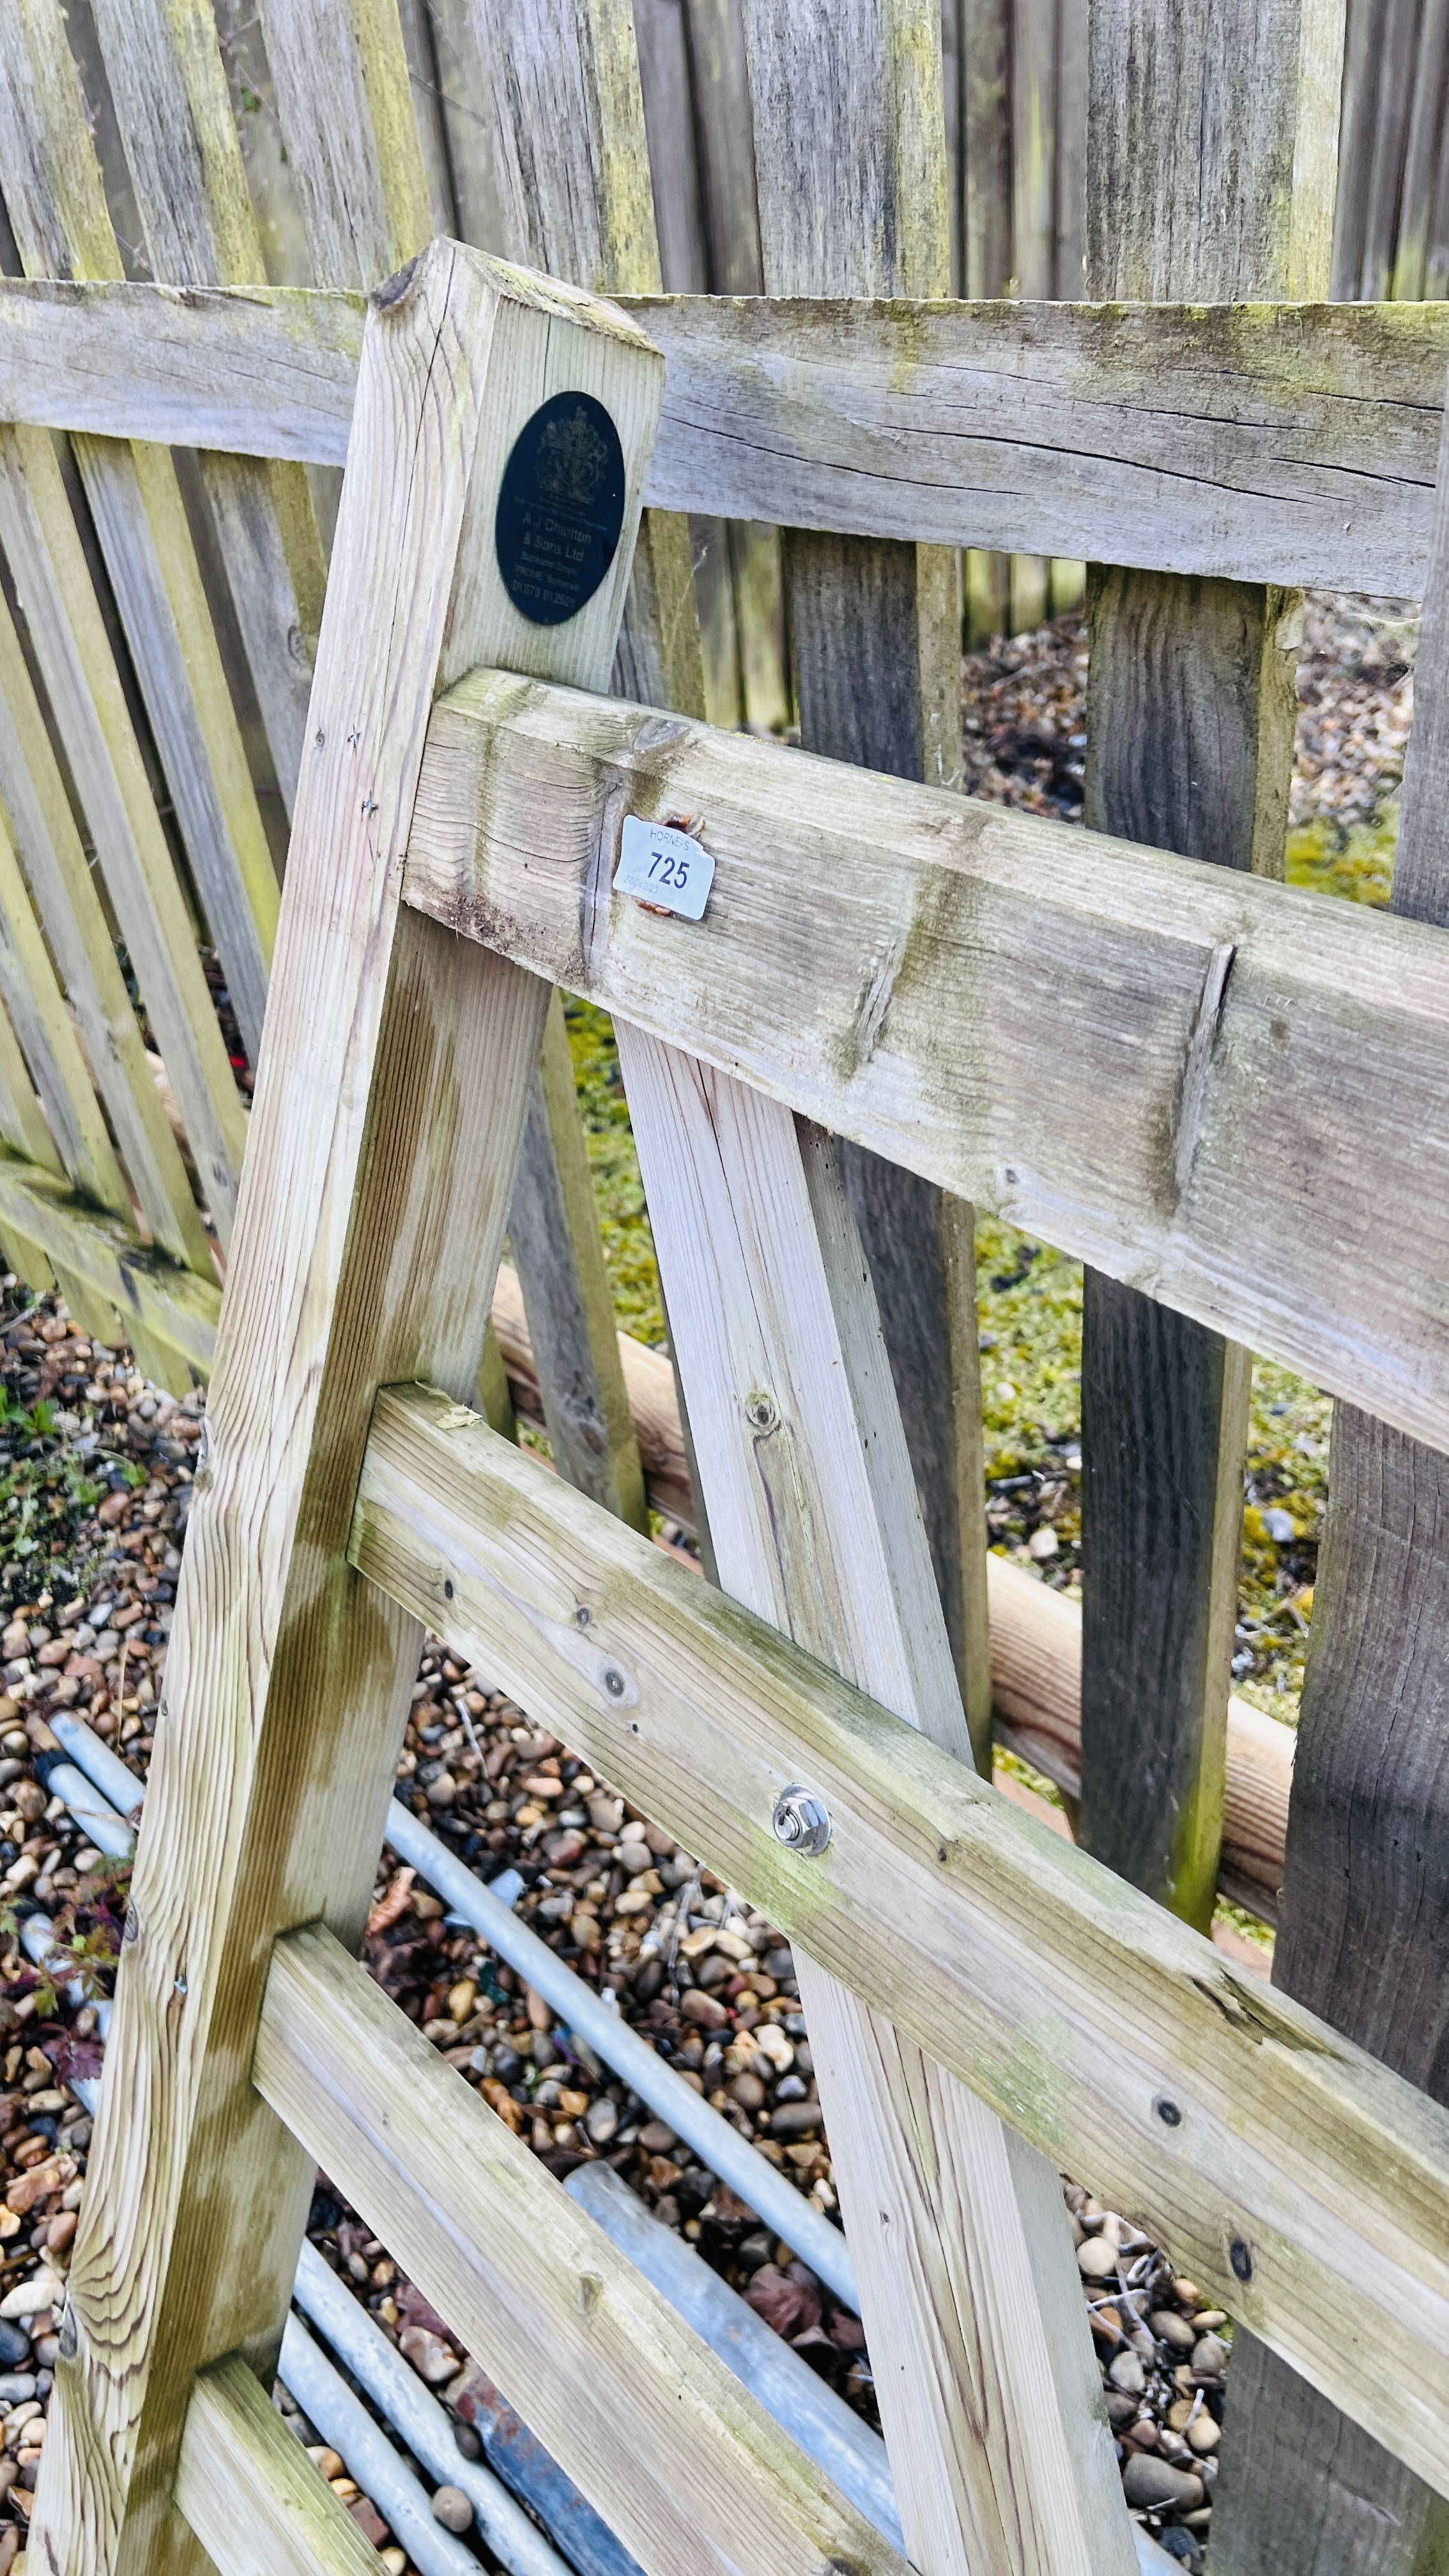 A 3FT (91CM) 5 BAR WOODEN PERSONAL GATE 122CM H. - Image 3 of 3